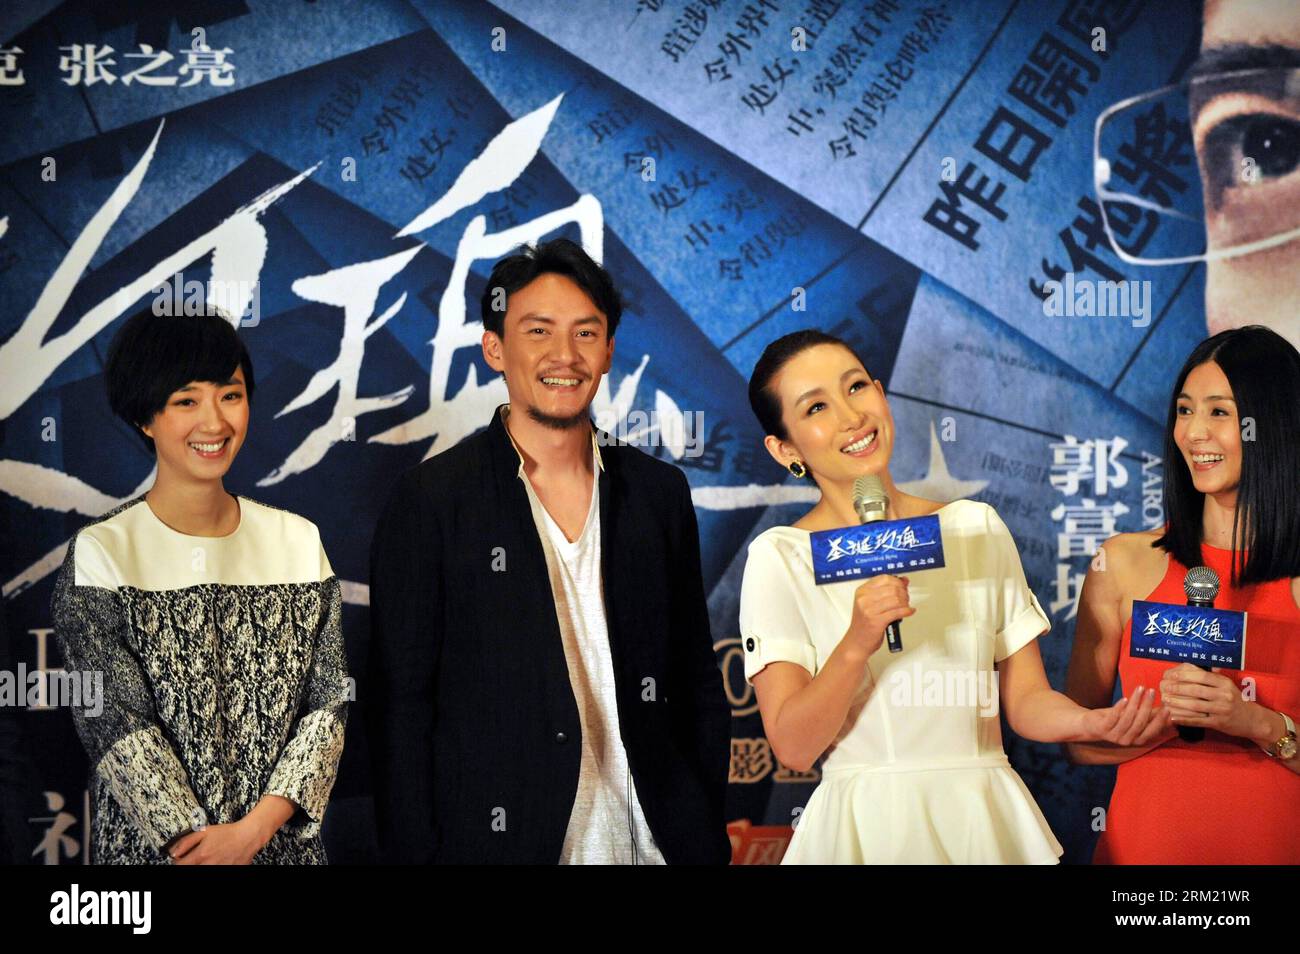 Bildnummer: 59668444  Datum: 20.05.2013  Copyright: imago/Xinhua (130520) -- BEIJING, May 20, 2013 (Xinhua) -- Actress Kwai Lun-mei (L), actor Chang Chen (2nd L) and Actress Qin Hailu (2nd R) attend a press conference held for the premiere of movie Christmas Rose in Beijing, China, May 20, 2013. The movie is expected to be released in China on May 24, 2013. (Xinhua/Bi Xiaoyang) (hdt) CHINA-BEIJING-MOVIE-CHRISTMAS ROSE-PREMIERE (CN) PUBLICATIONxNOTxINxCHN Entertainment People x0x xkg 2013 quer      59668444 Date 20 05 2013 Copyright Imago XINHUA  Beijing May 20 2013 XINHUA actress Kwai Lun Mei Stock Photo